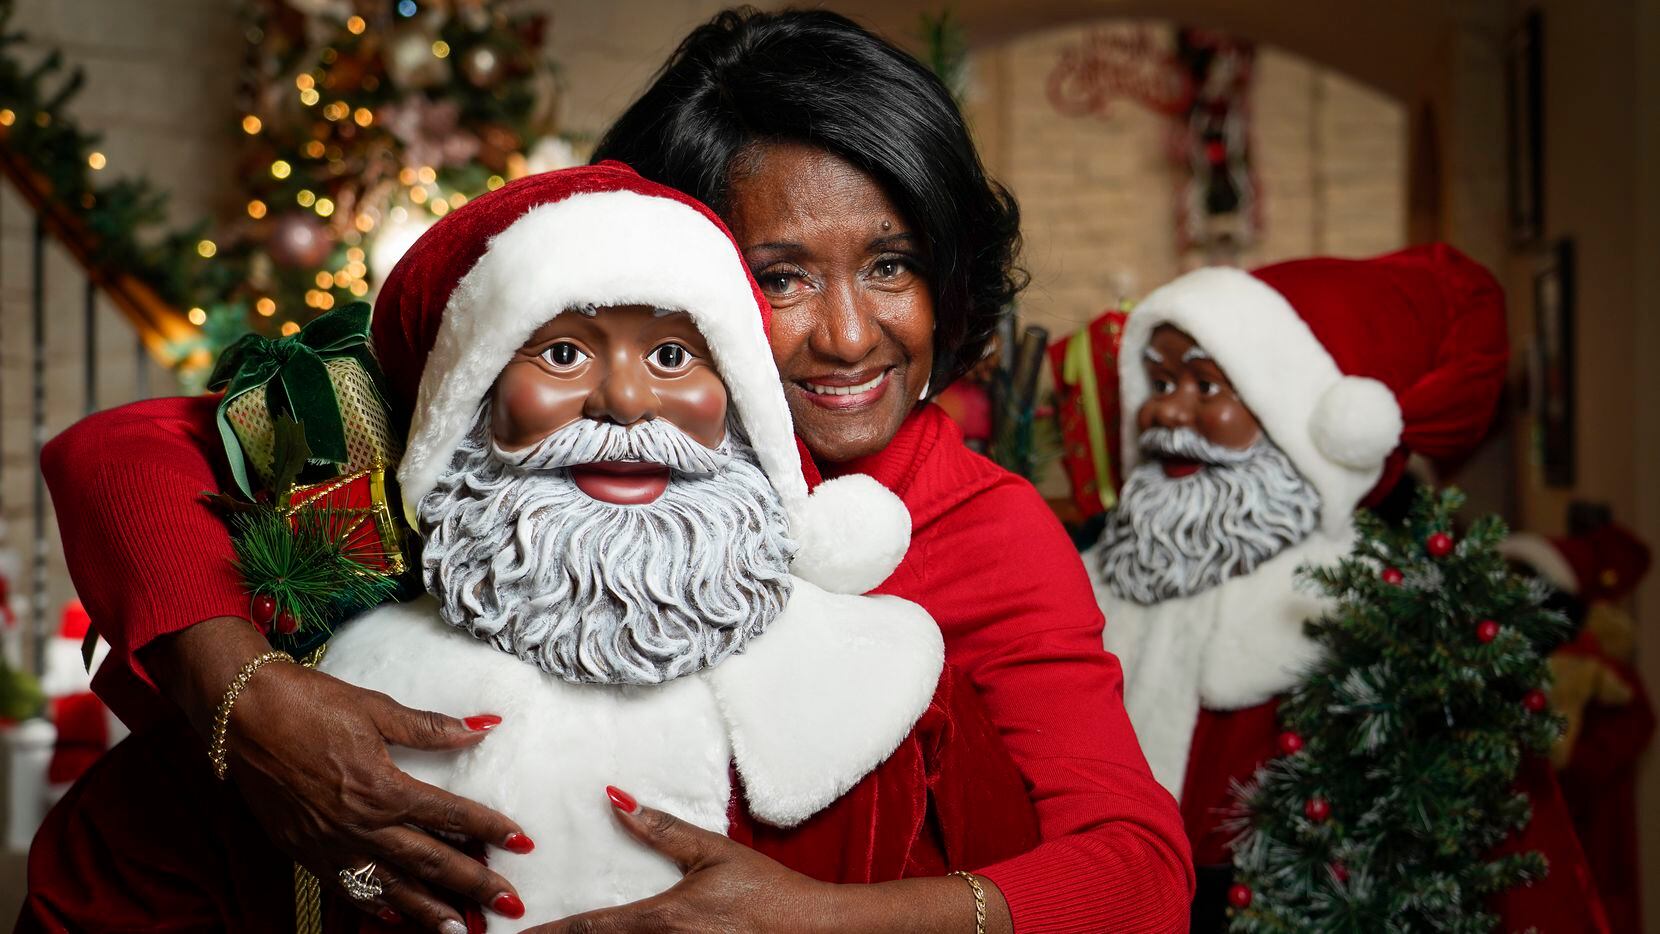 Pat Hamilton has made a yearslong passion out of collecting Black Santas. Her annual...